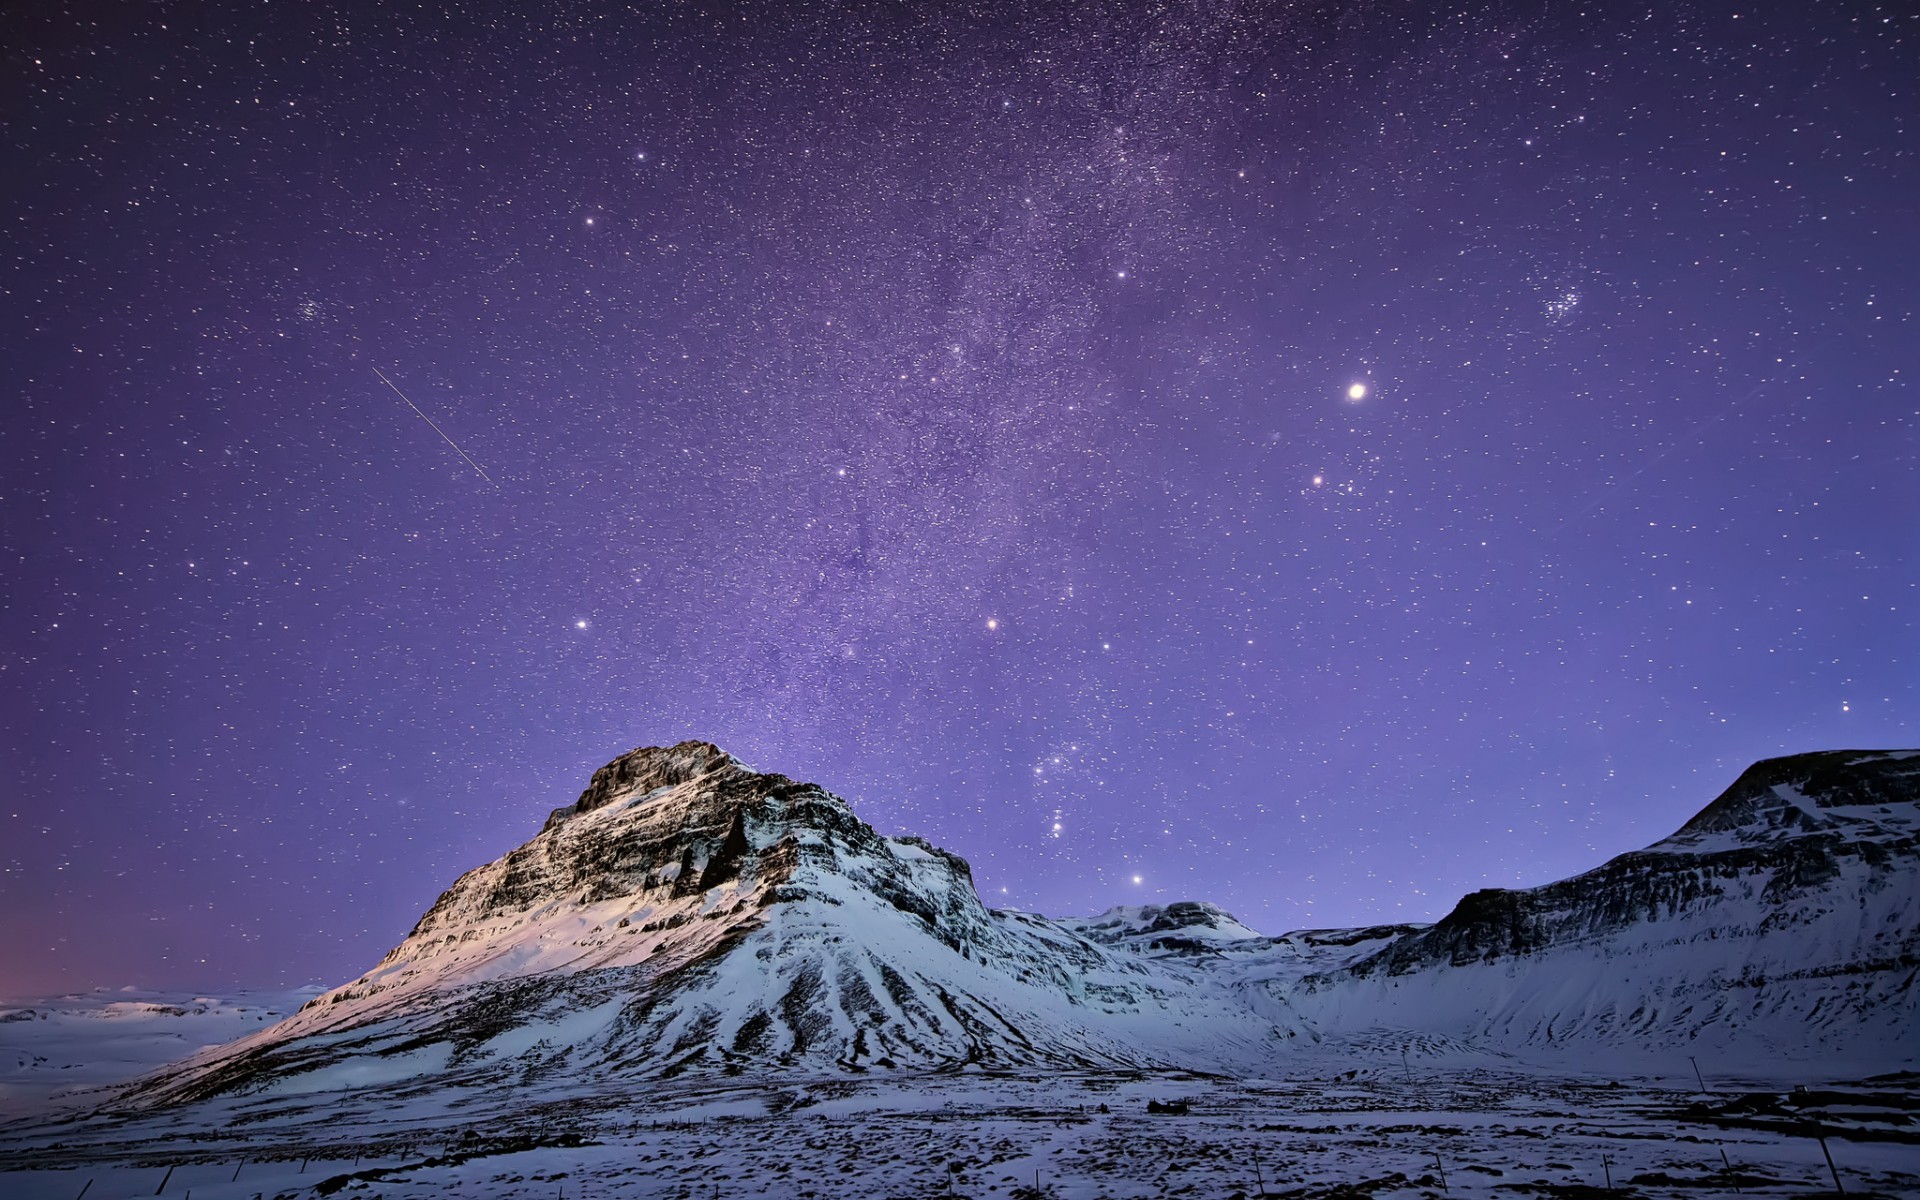 General 1920x1200 space universe stars mountains looking up sky ice cold rocks winter outdoors landscape nature